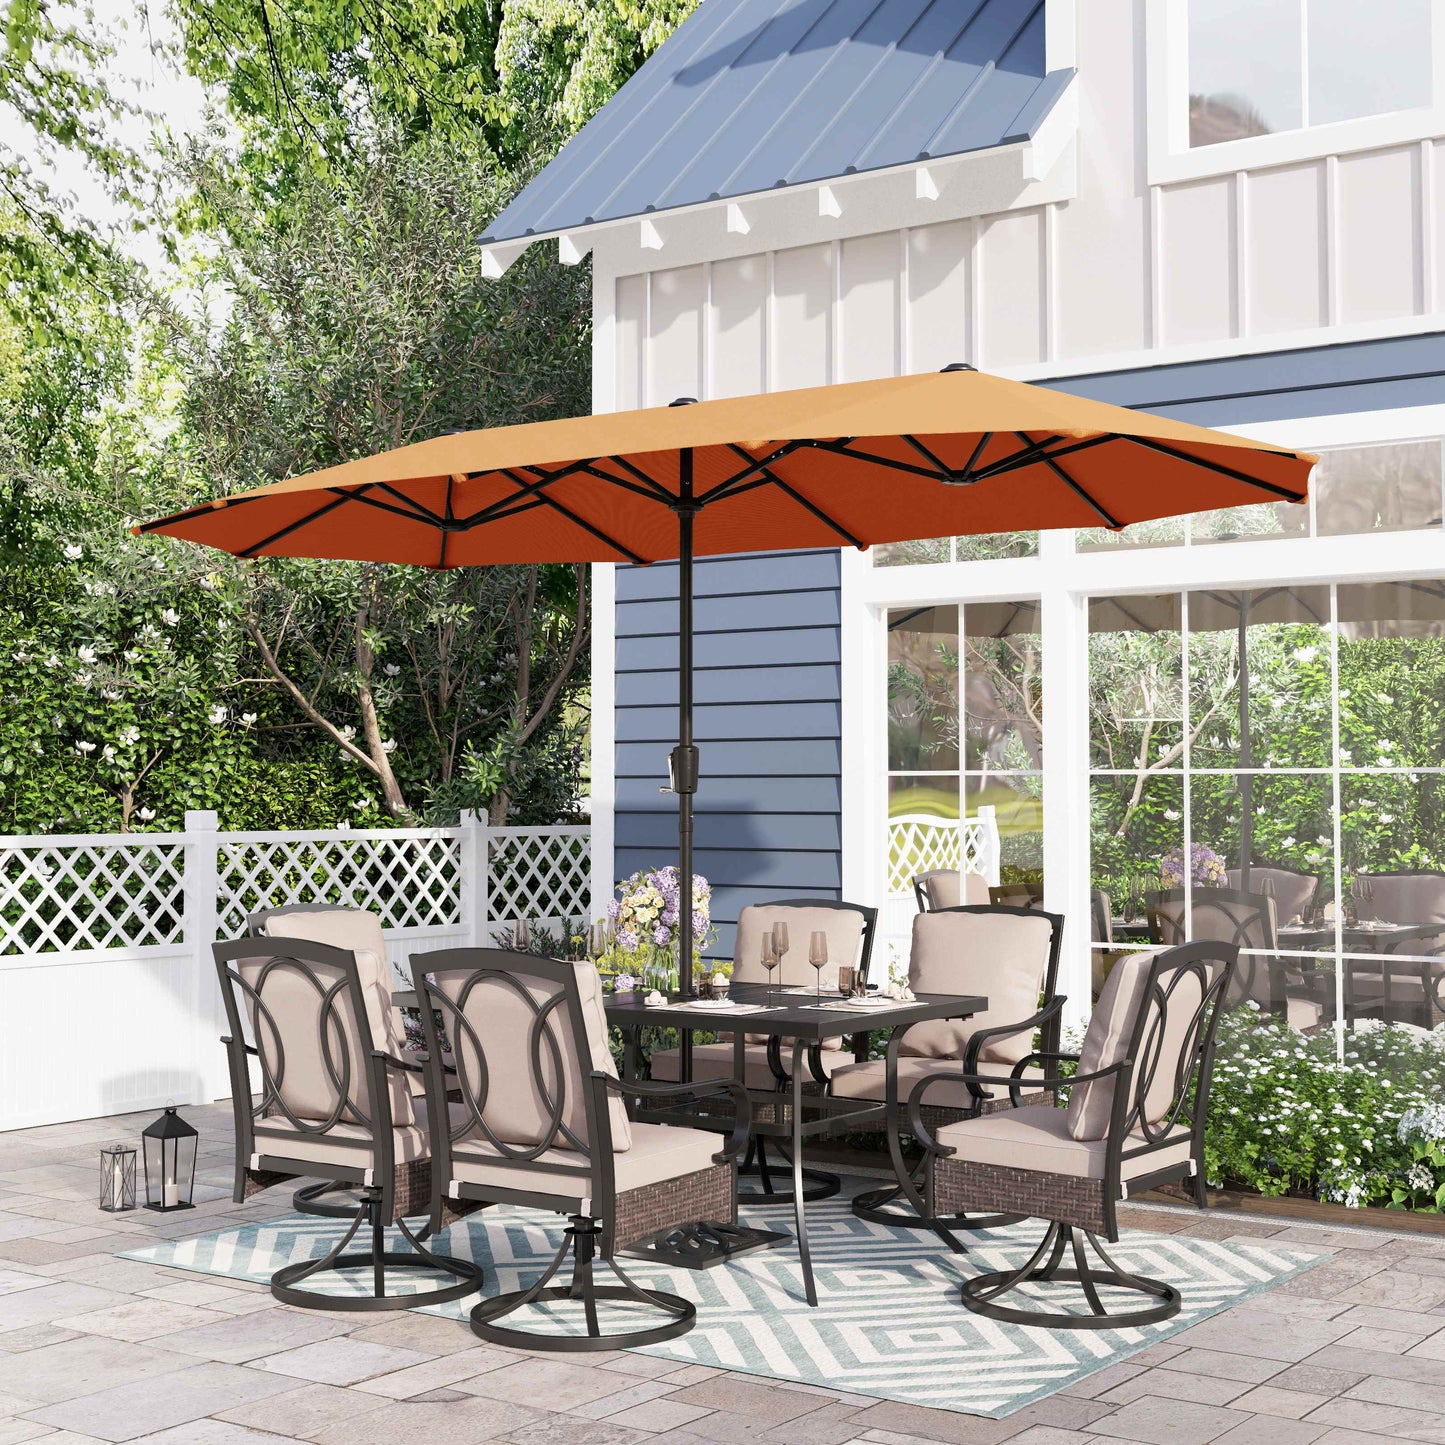 Sophia & William 8-Piece Outdoor Patio Dining Set with 13 ft Orange Red Umbrella, Rattan Chairs & Rectangle Table for 6-person